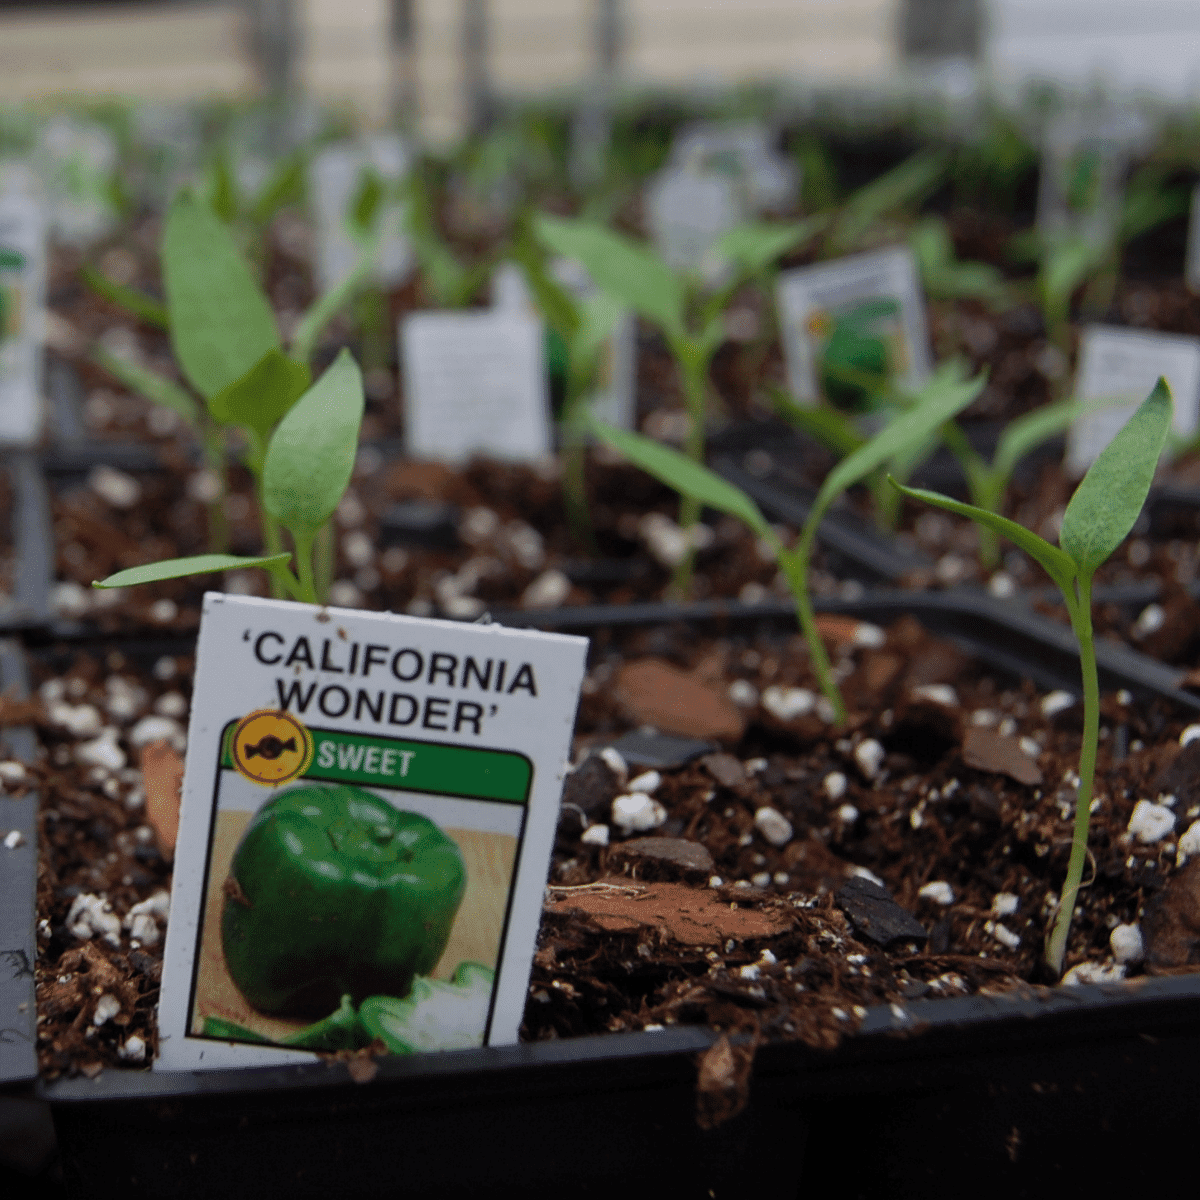 pepper plant label and flats of tiny pepper plant sprouts